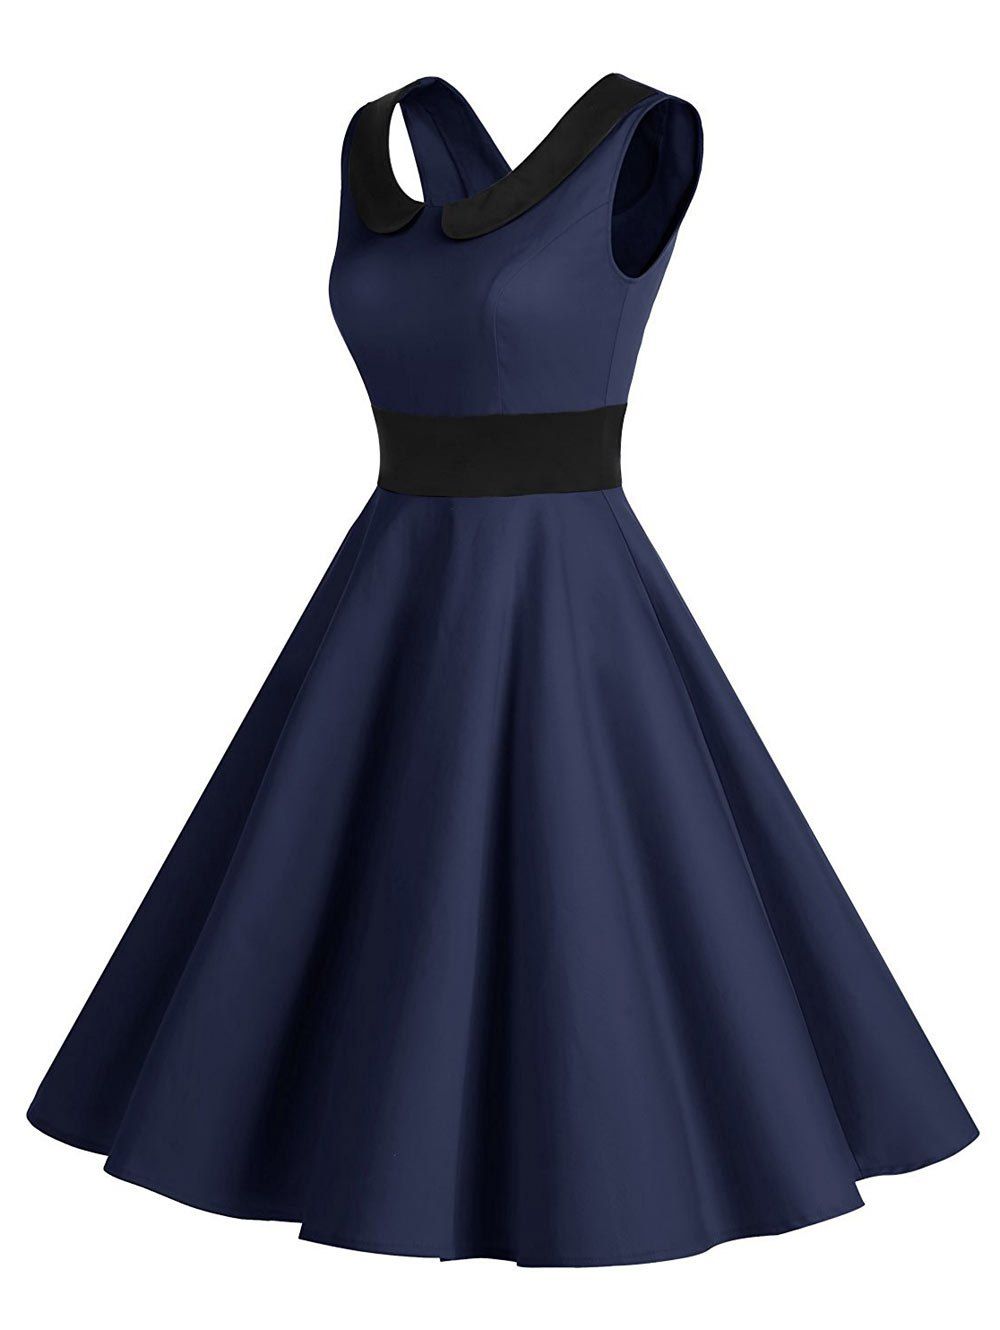 2018 Vintage Peter Pan Collar Party Pin Up Dress DEEP BLUE S In Vintage ...